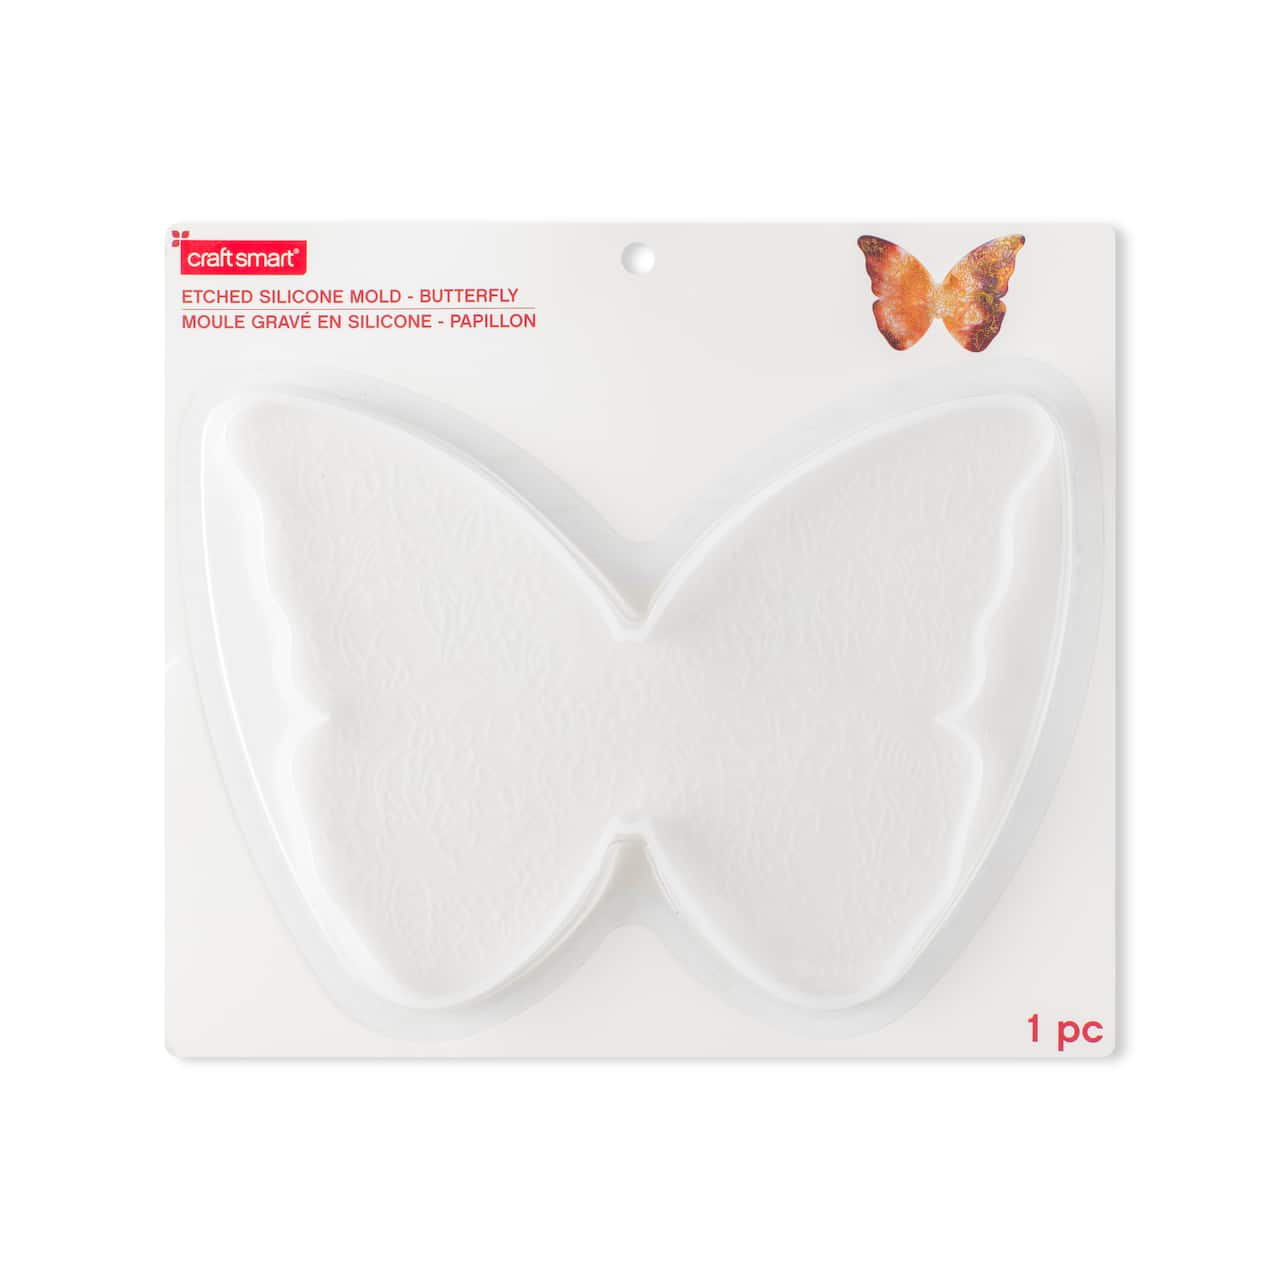 Butterfly Etched Silicone Mold by Craft Smart®